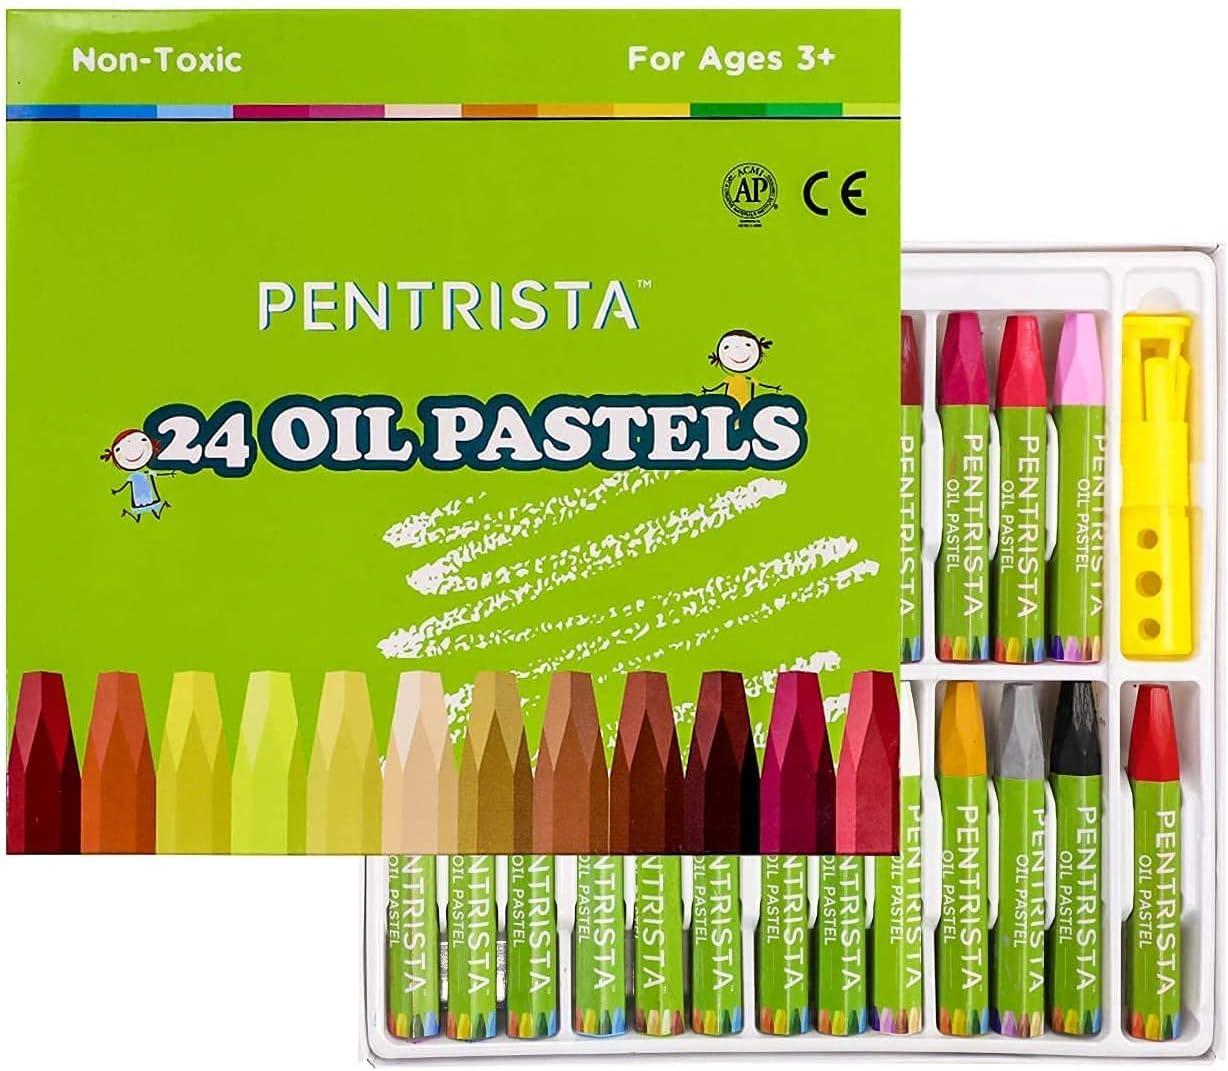 PENTRISTA Oil Pastels 24+1 Assorted Colors+1 Sharpener and 1 Pastel Holder  Oil Pastels for Kids Indoor Activities At Home Non-Toxic Oil Pastel Crayons  for Artist Students Smooth Painting and Drawing 24 Colors